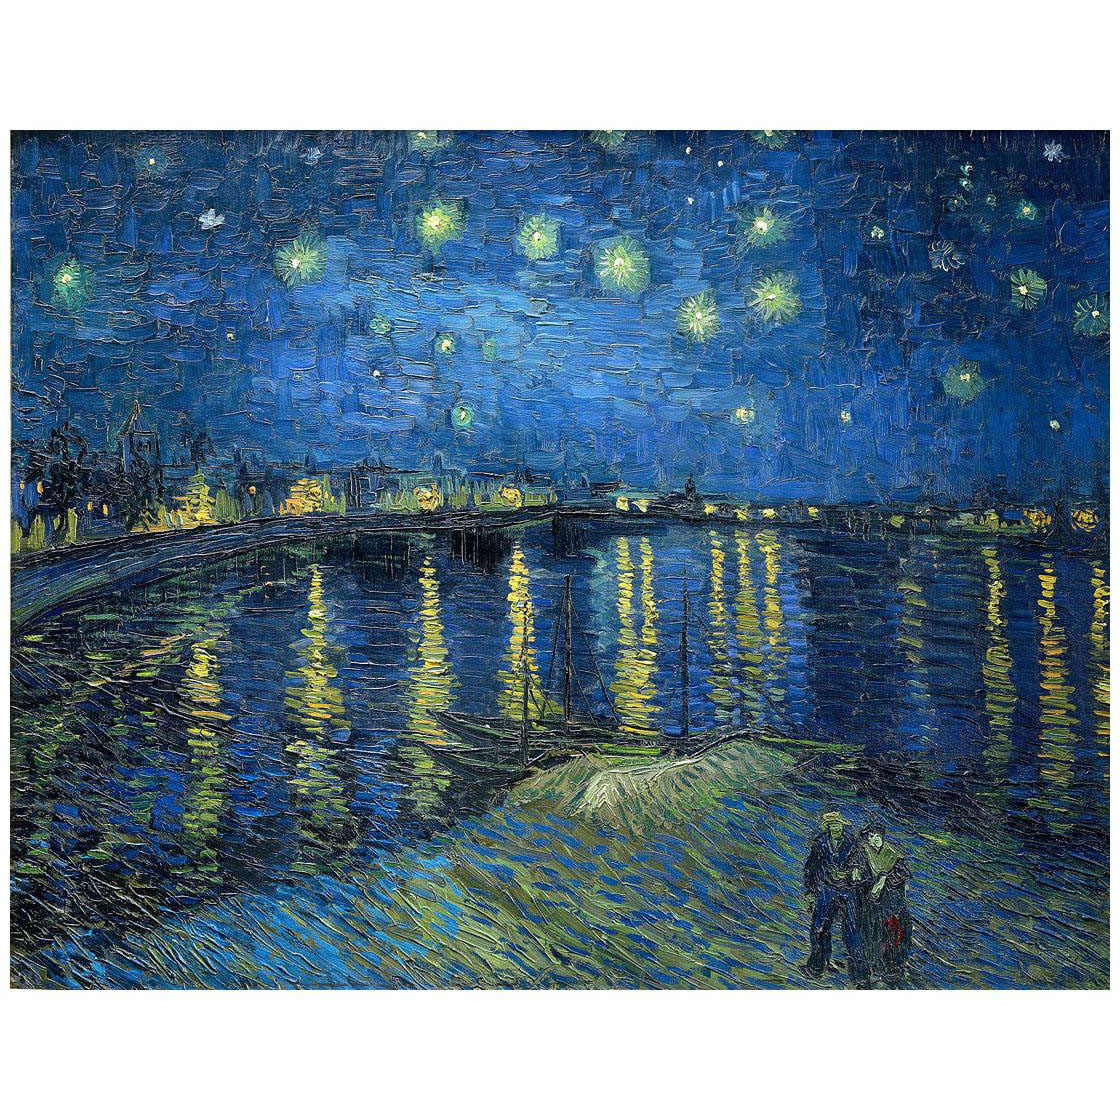 Vincent van Gogh. Starry Night over the Rhone. 1888. Musee d’Orsay Paris